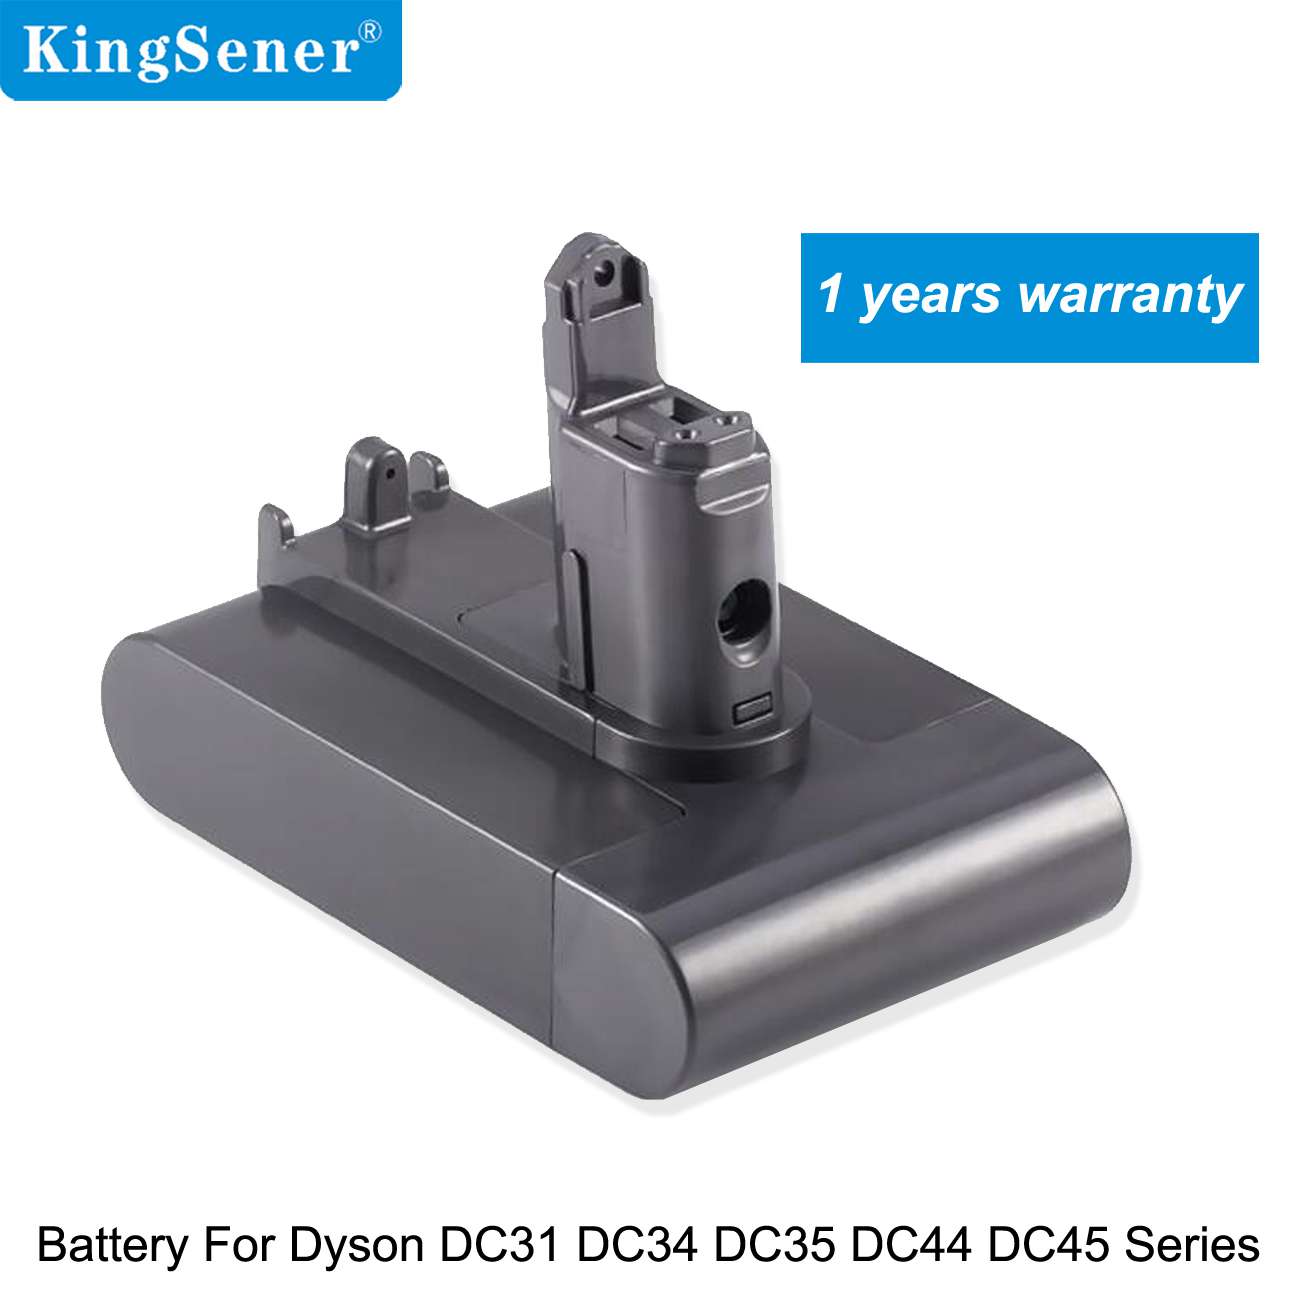 Dyson DC34 Battery Replacement